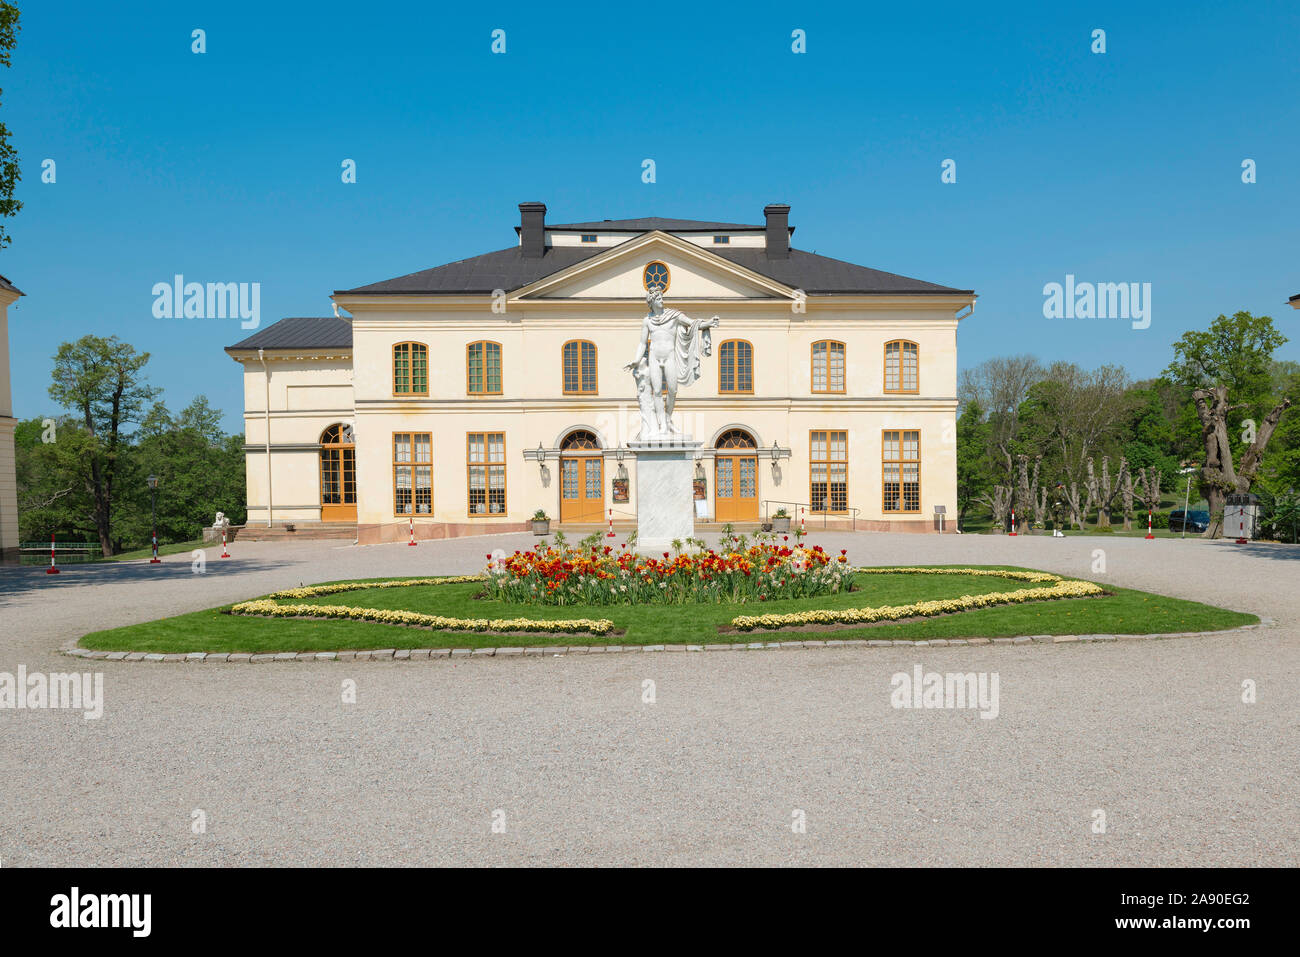 Drottningholm theatre, view in summer of the entrance to the Drottningholms Slottsteater (Palace Theatre) sited next to Drottningholm Palace, Sweden. Stock Photo